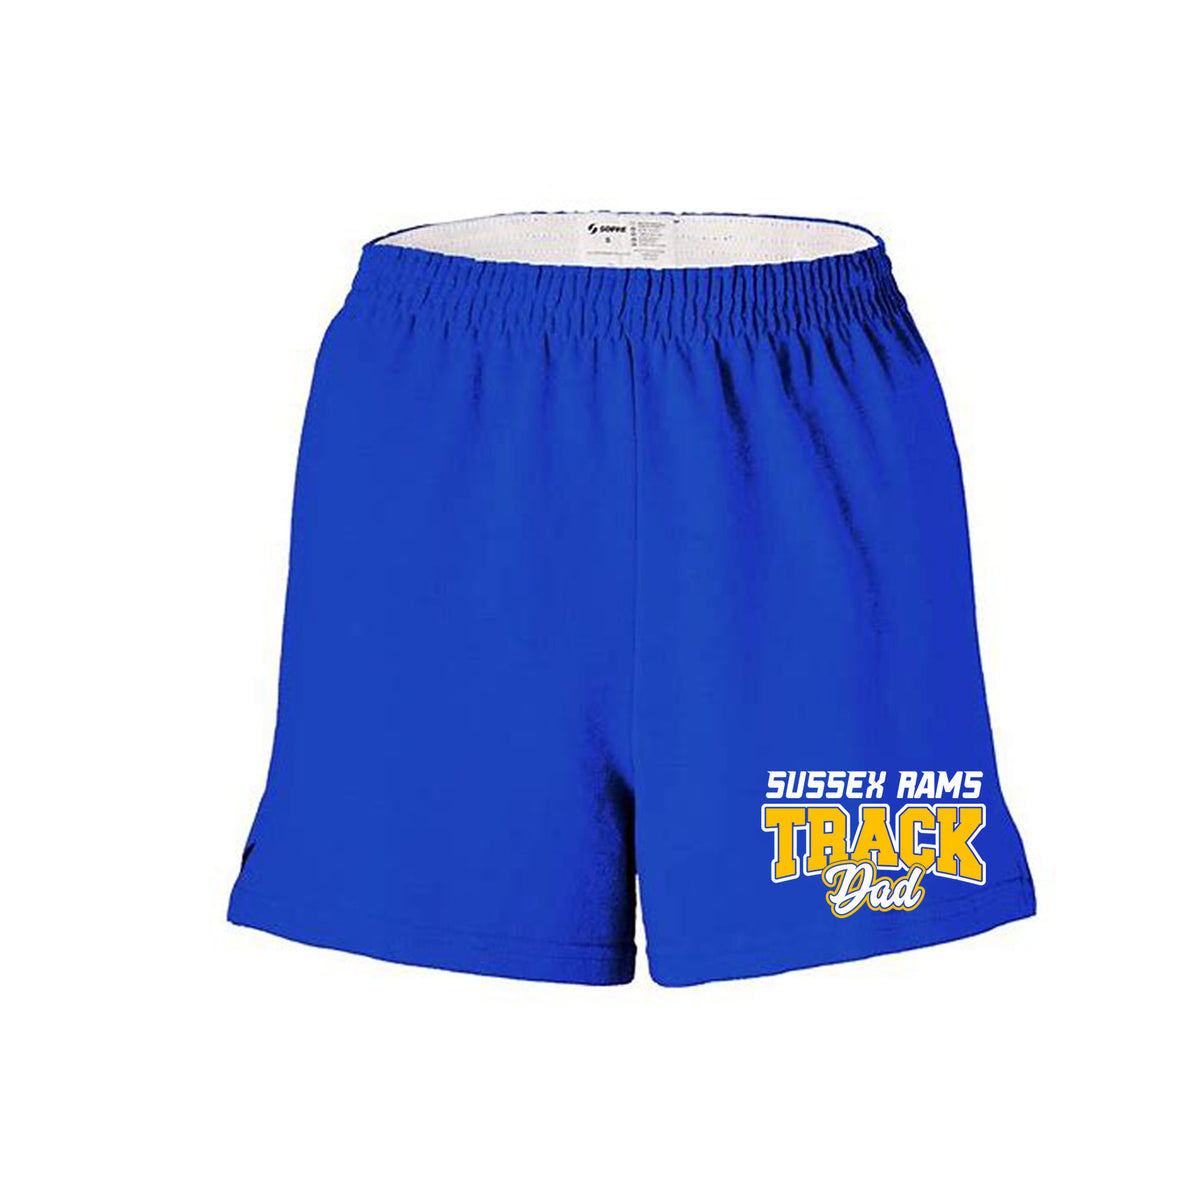 Sussex Rams Track girls Shorts Design 1